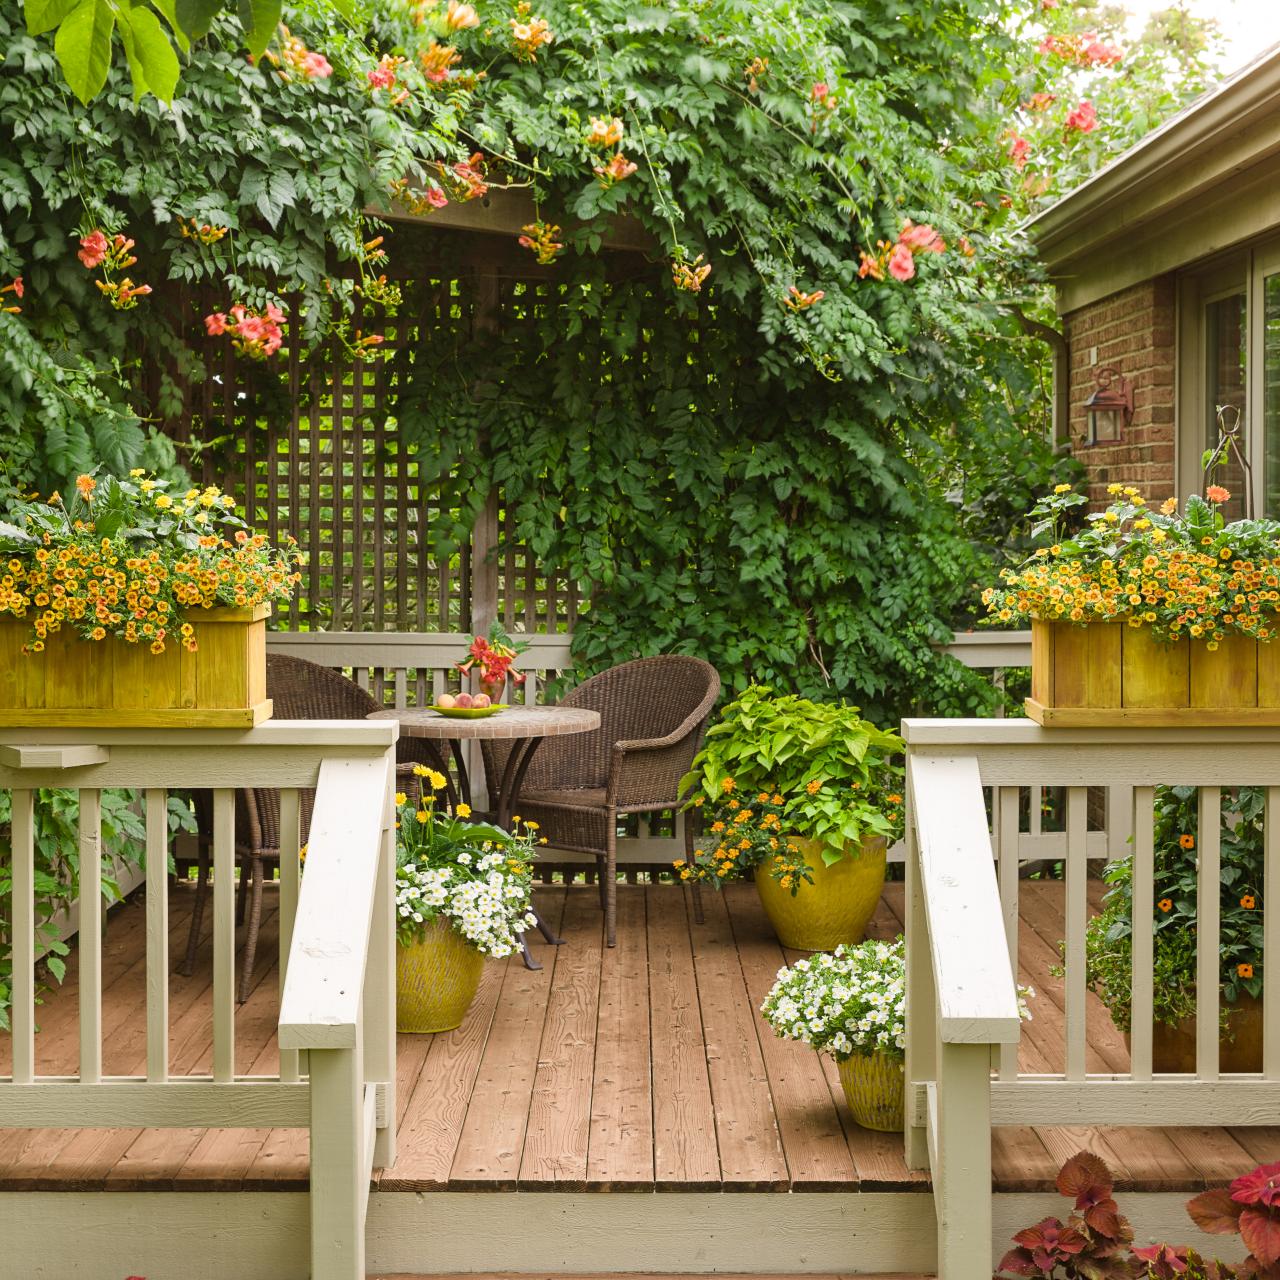 30 Fence Decorating Ideas to Spruce Up Your Yard